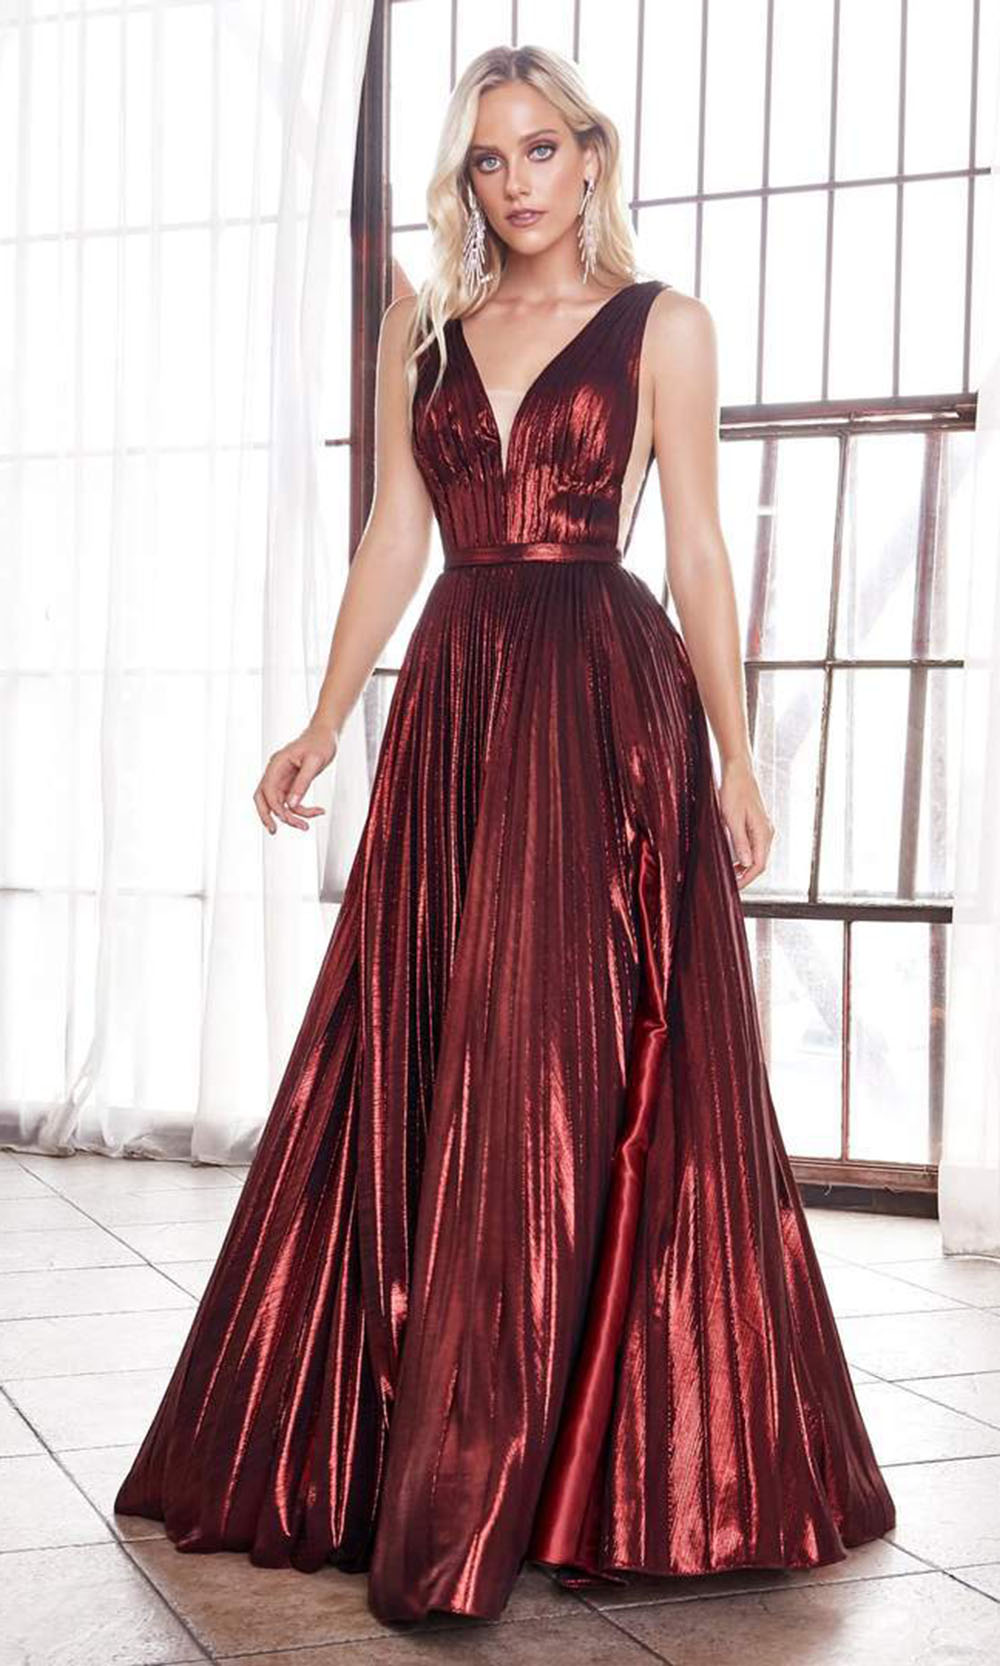 Cinderella Divine - Deep V Neck High Slit Metallic Pleated Gown CD160 - 1 pc Burgundy In Size 14 Available CCSALE 14 / Burgundy